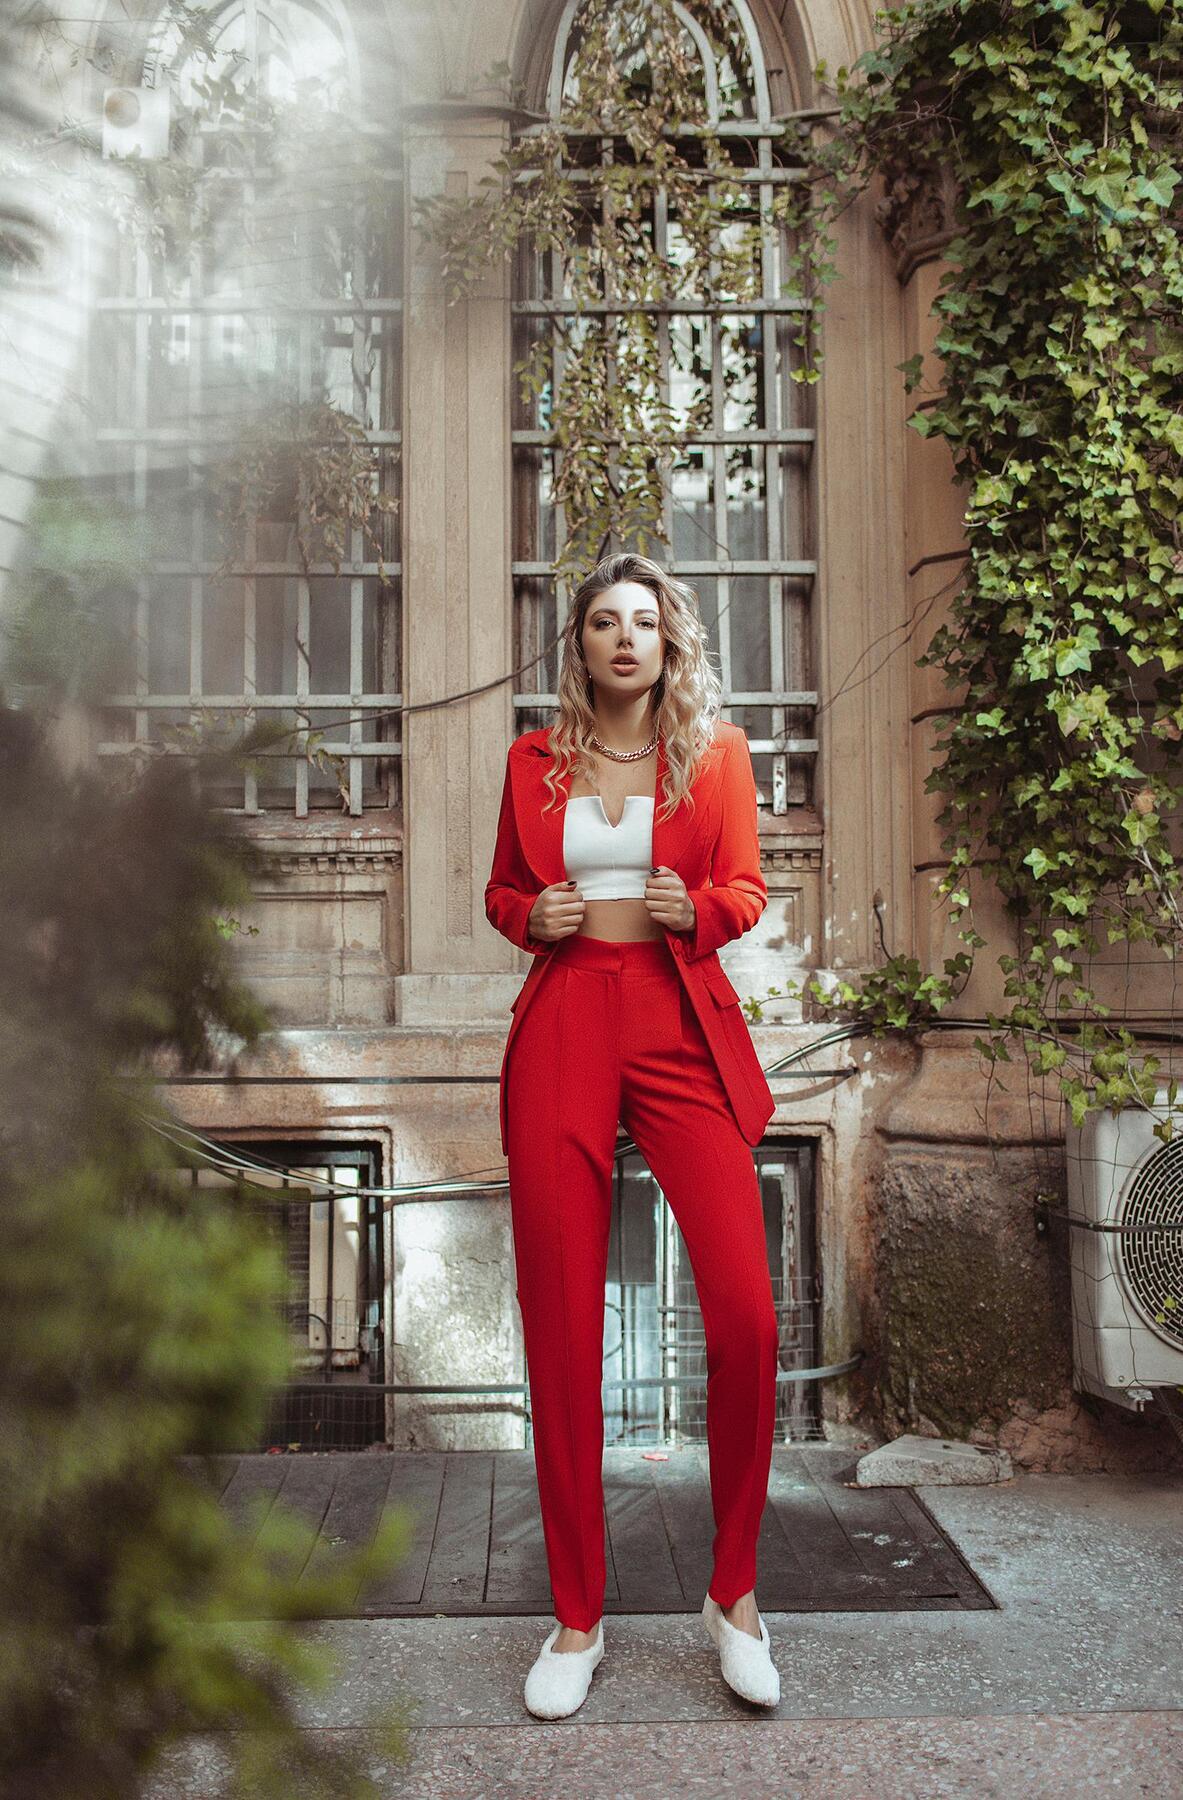 Red Single-Breasted Suit 2-Piece